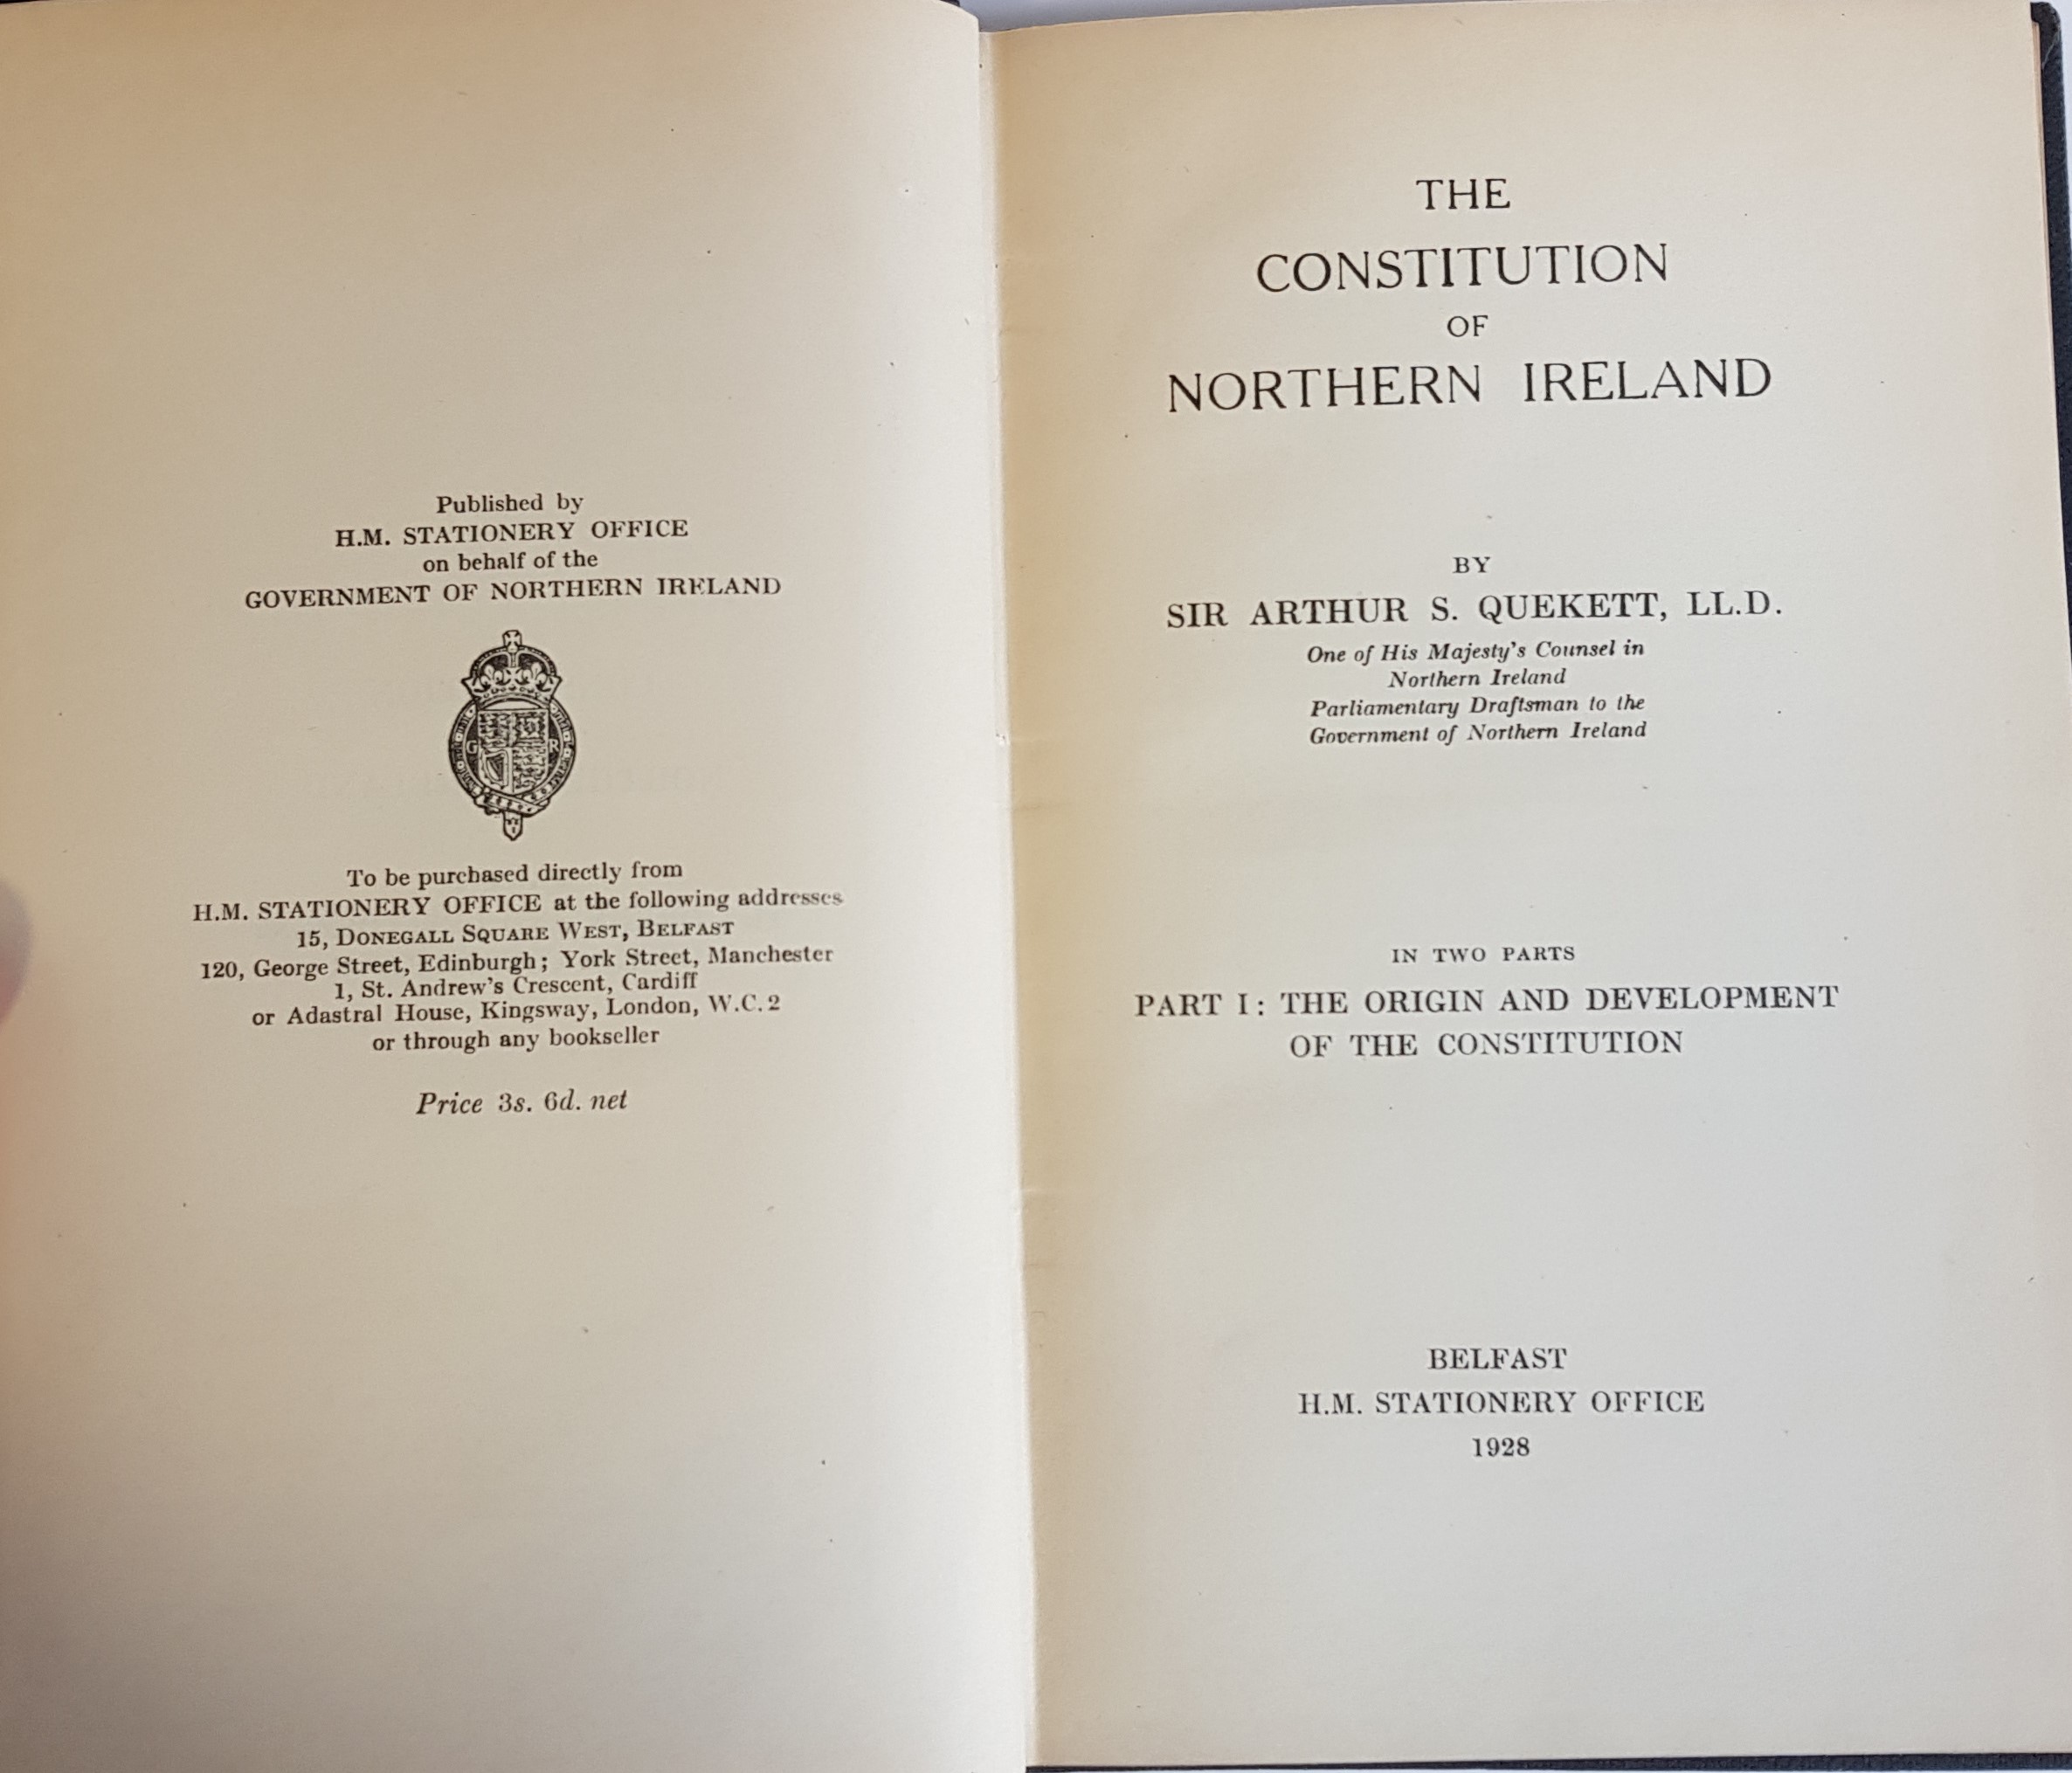 BOOK - THE CONSTITUTION OF NORTHERN IRELAND 1928